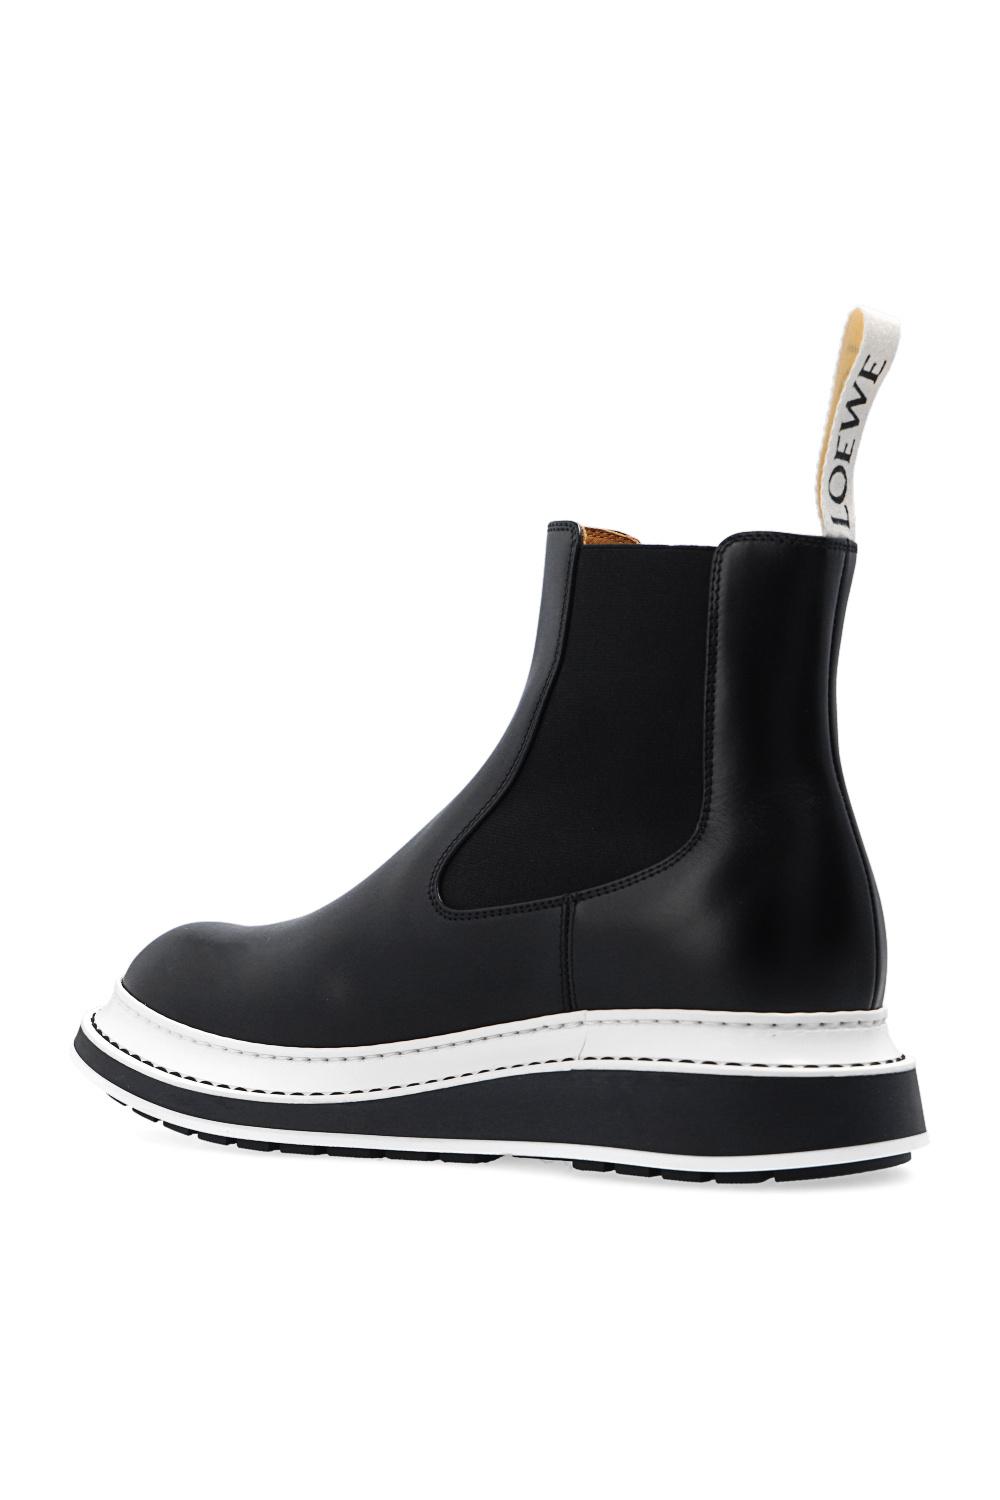 Loewe Leather Chelsea Boots in Black | Lyst